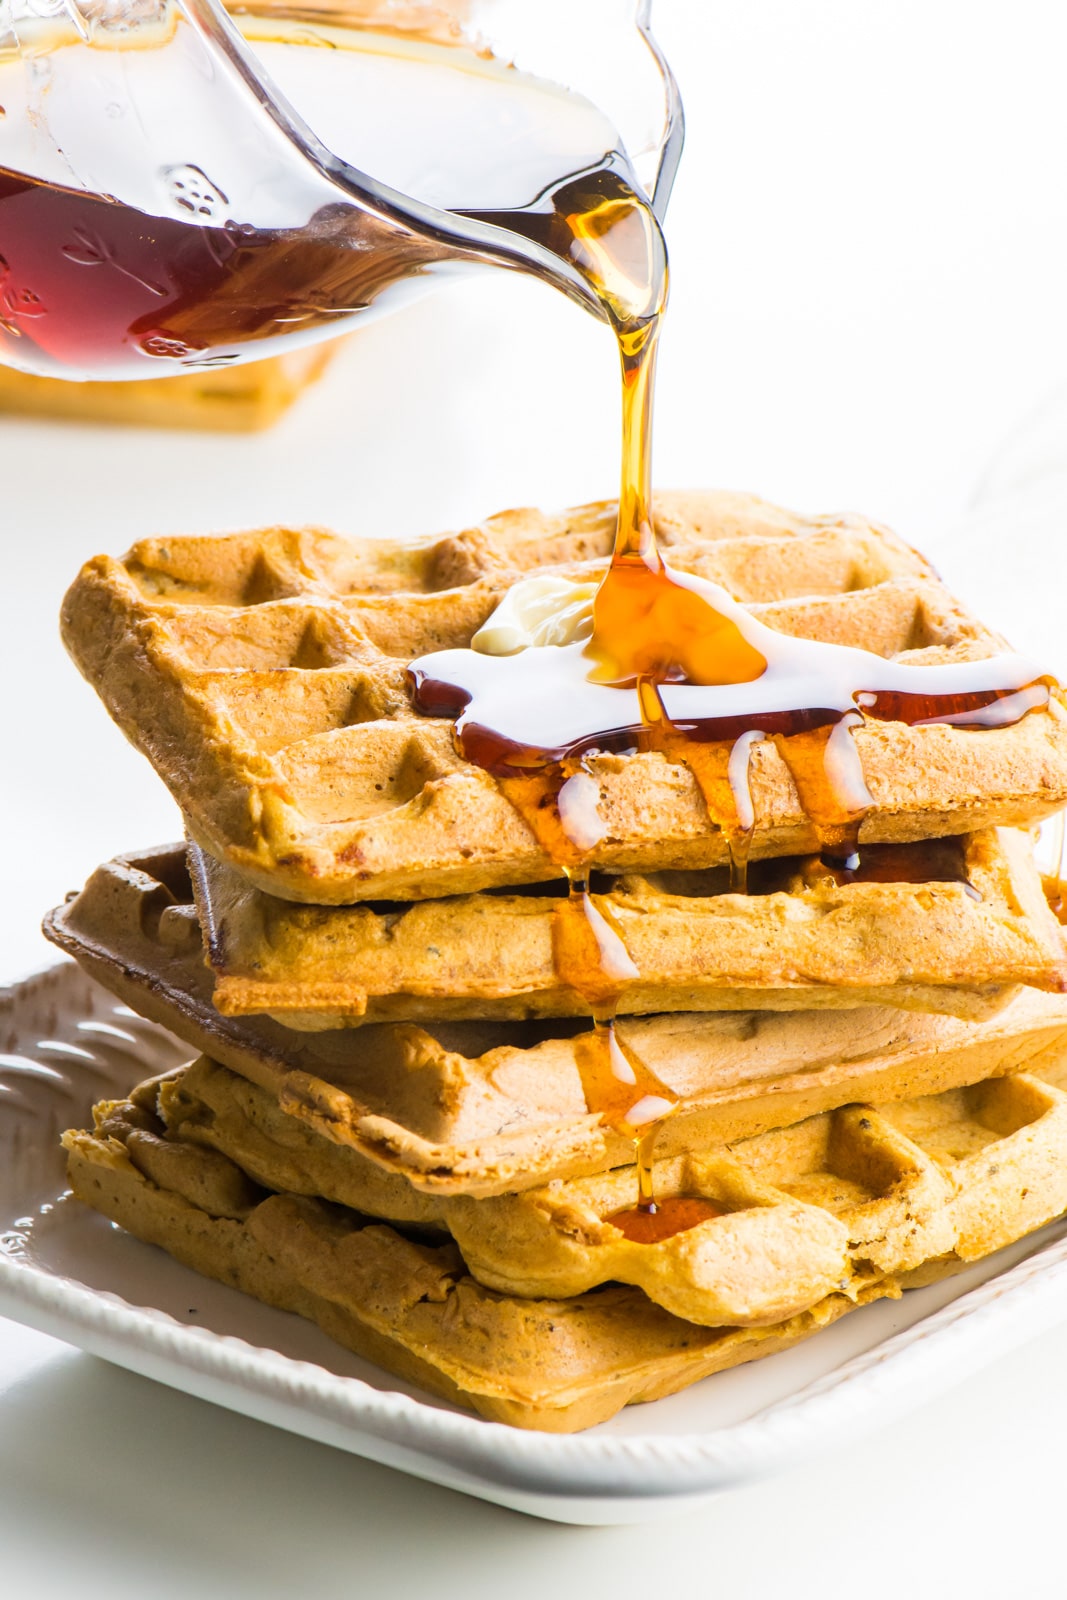 A glass pitcher hovers over a stack of whole wheat waffles and is pouring maple syrup over the all. The maple syrup is running down the sides of the waffles. A pat of melted vegan butter is on the top waffle. 